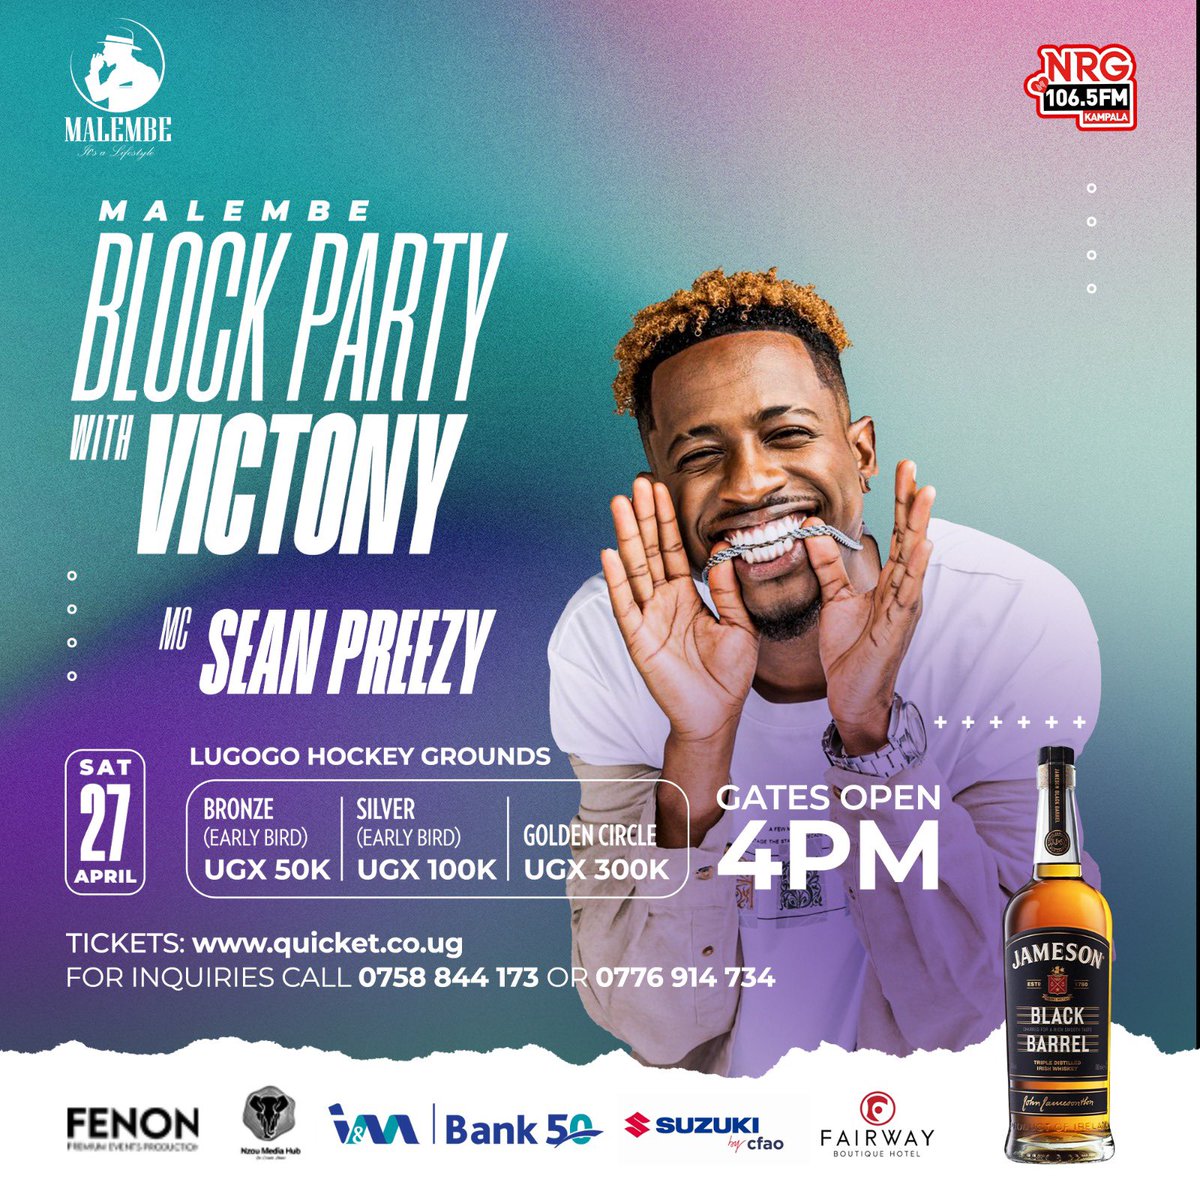 See you’ll tomorrow at Lugogo Hockey Grounds for the #VictonyBlockParty🔥🔥,gates will open at 4PM😎